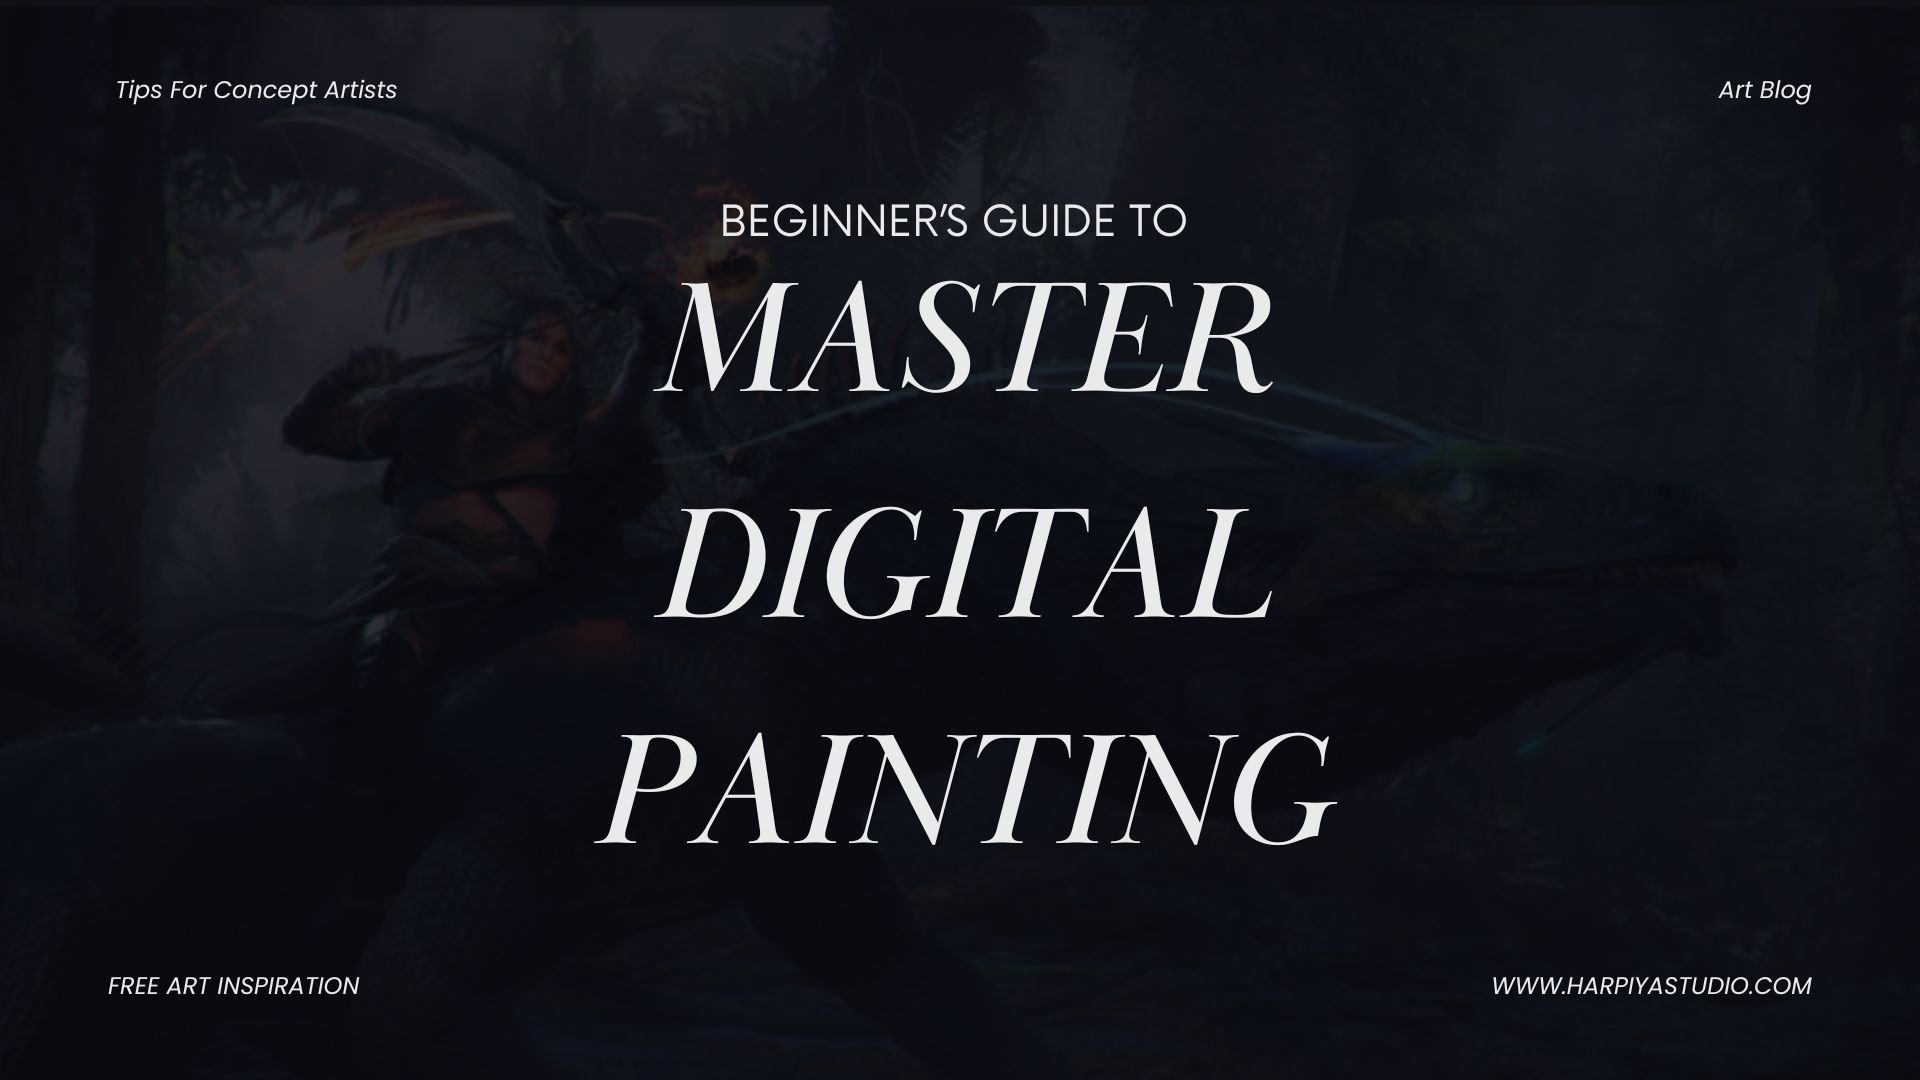 My step by step process creating a digital painting